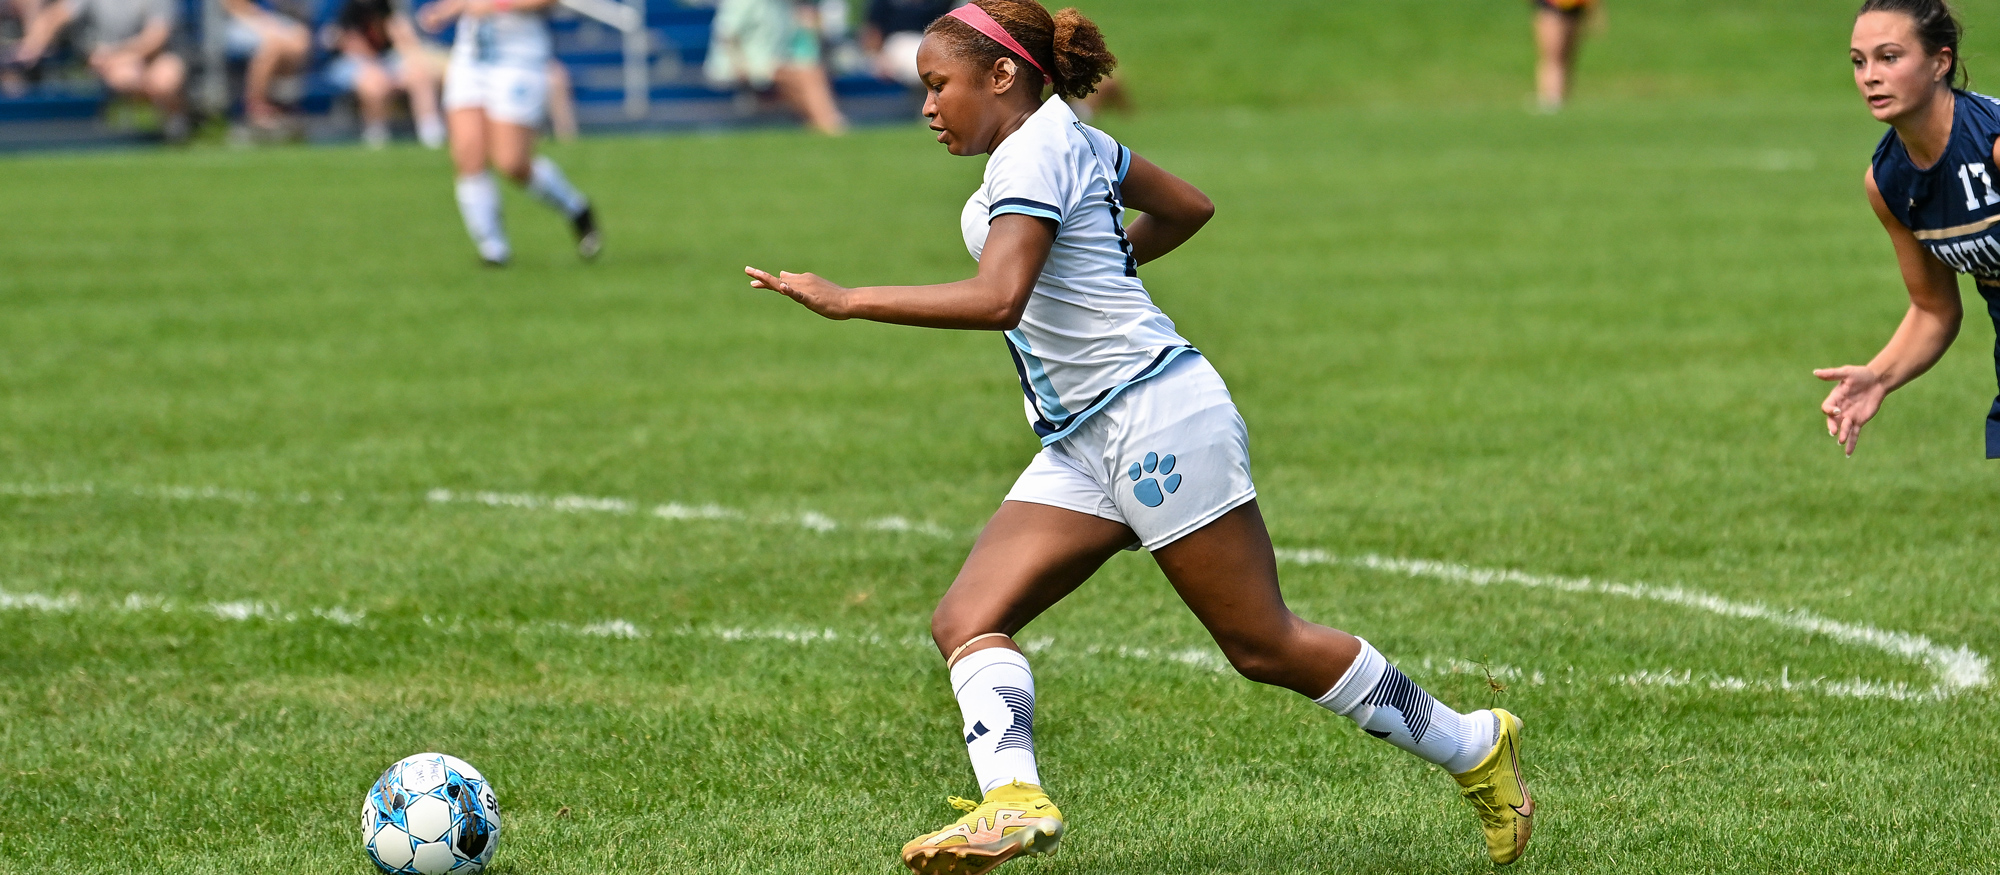 Sage Hudson's second goal of the season earned Mount Holyoke a 2-2 tie against Western New England University on Sept. 13, 2023. (RJB Sports file photo)